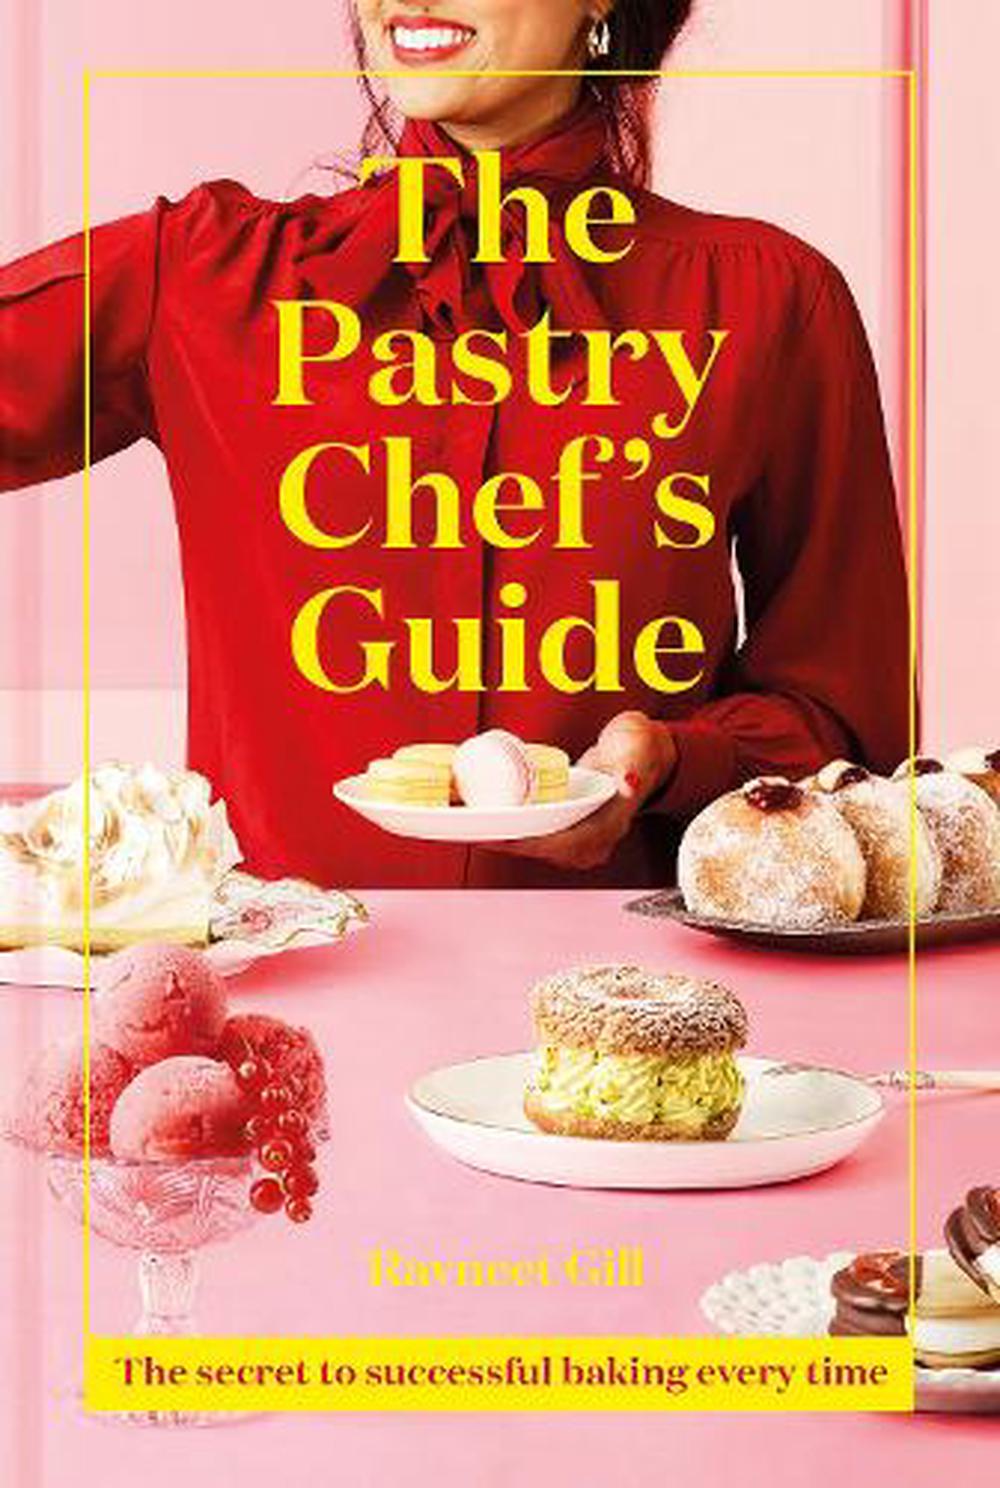 The Pastry Chef's Guide by Ravneet Gill – Burnt Honey Bakery